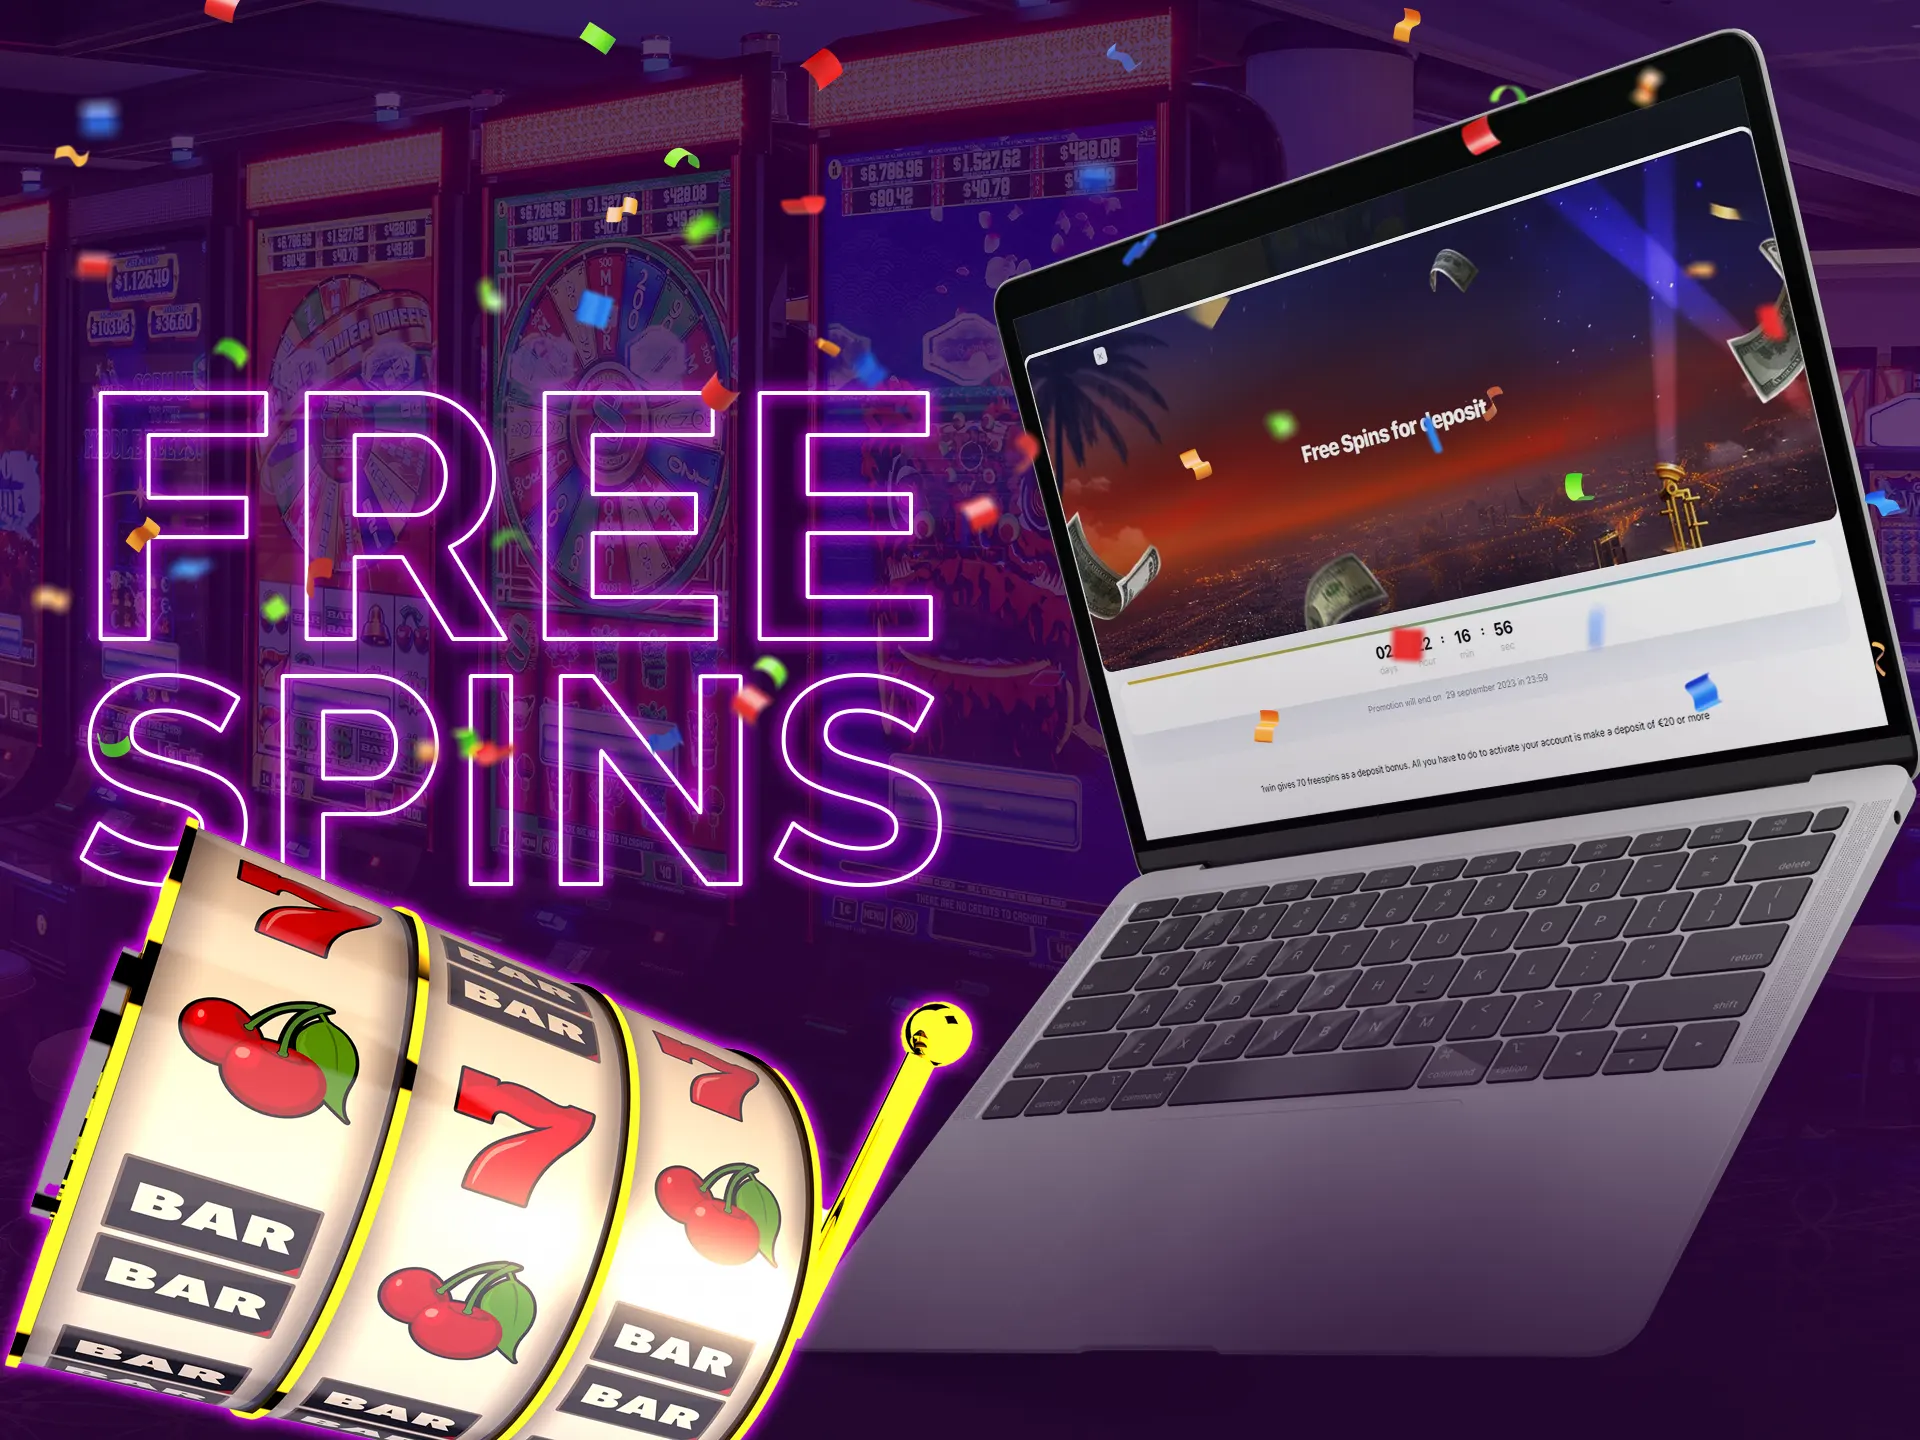 Best casinos offers free spins bonus for you.